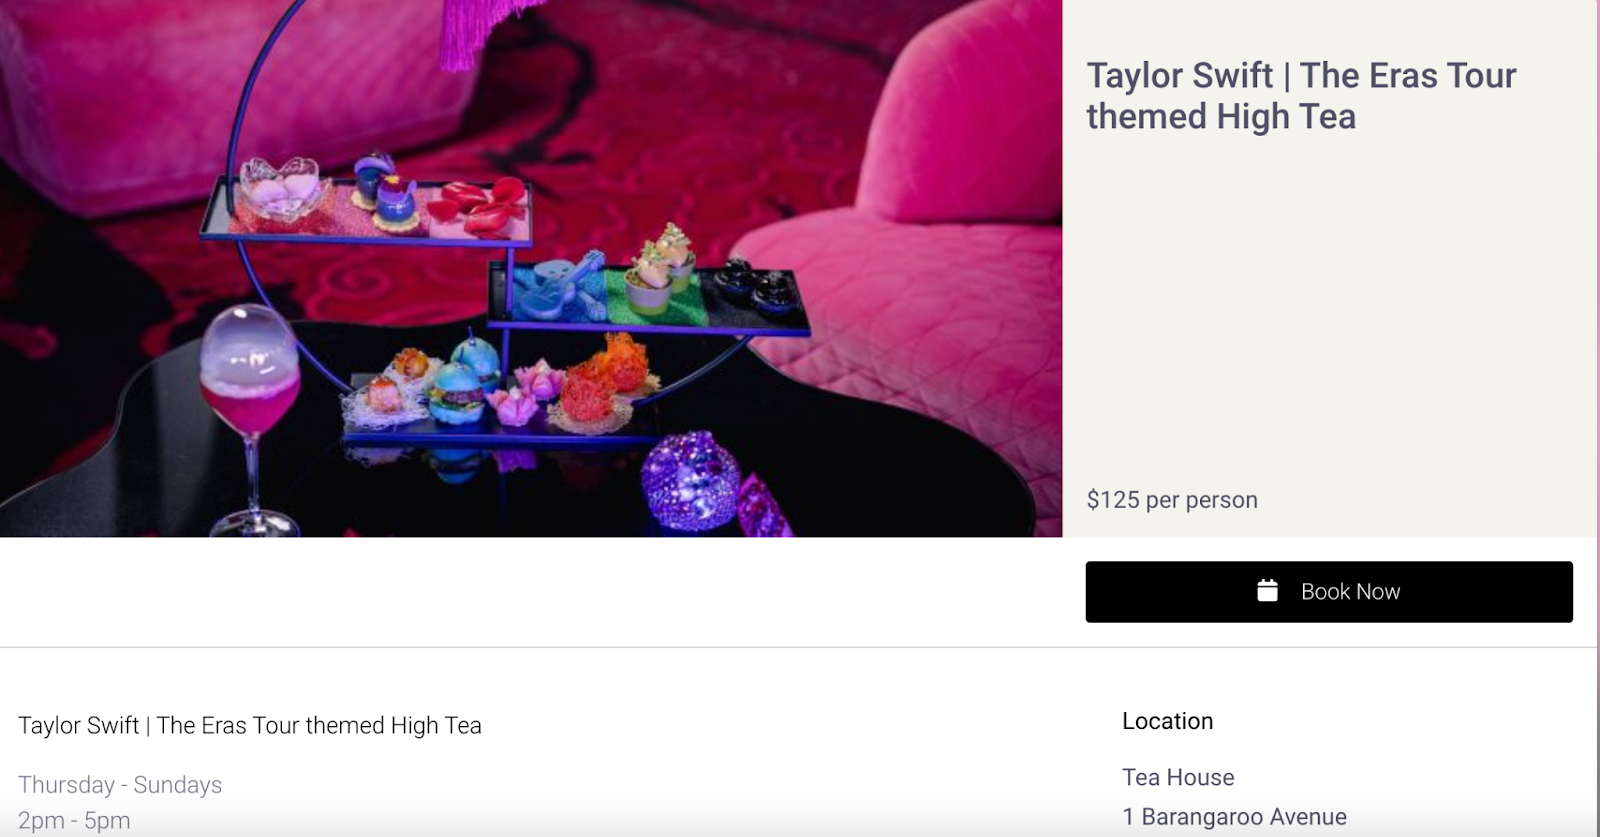 local hotel marketing strategy taylor swift event